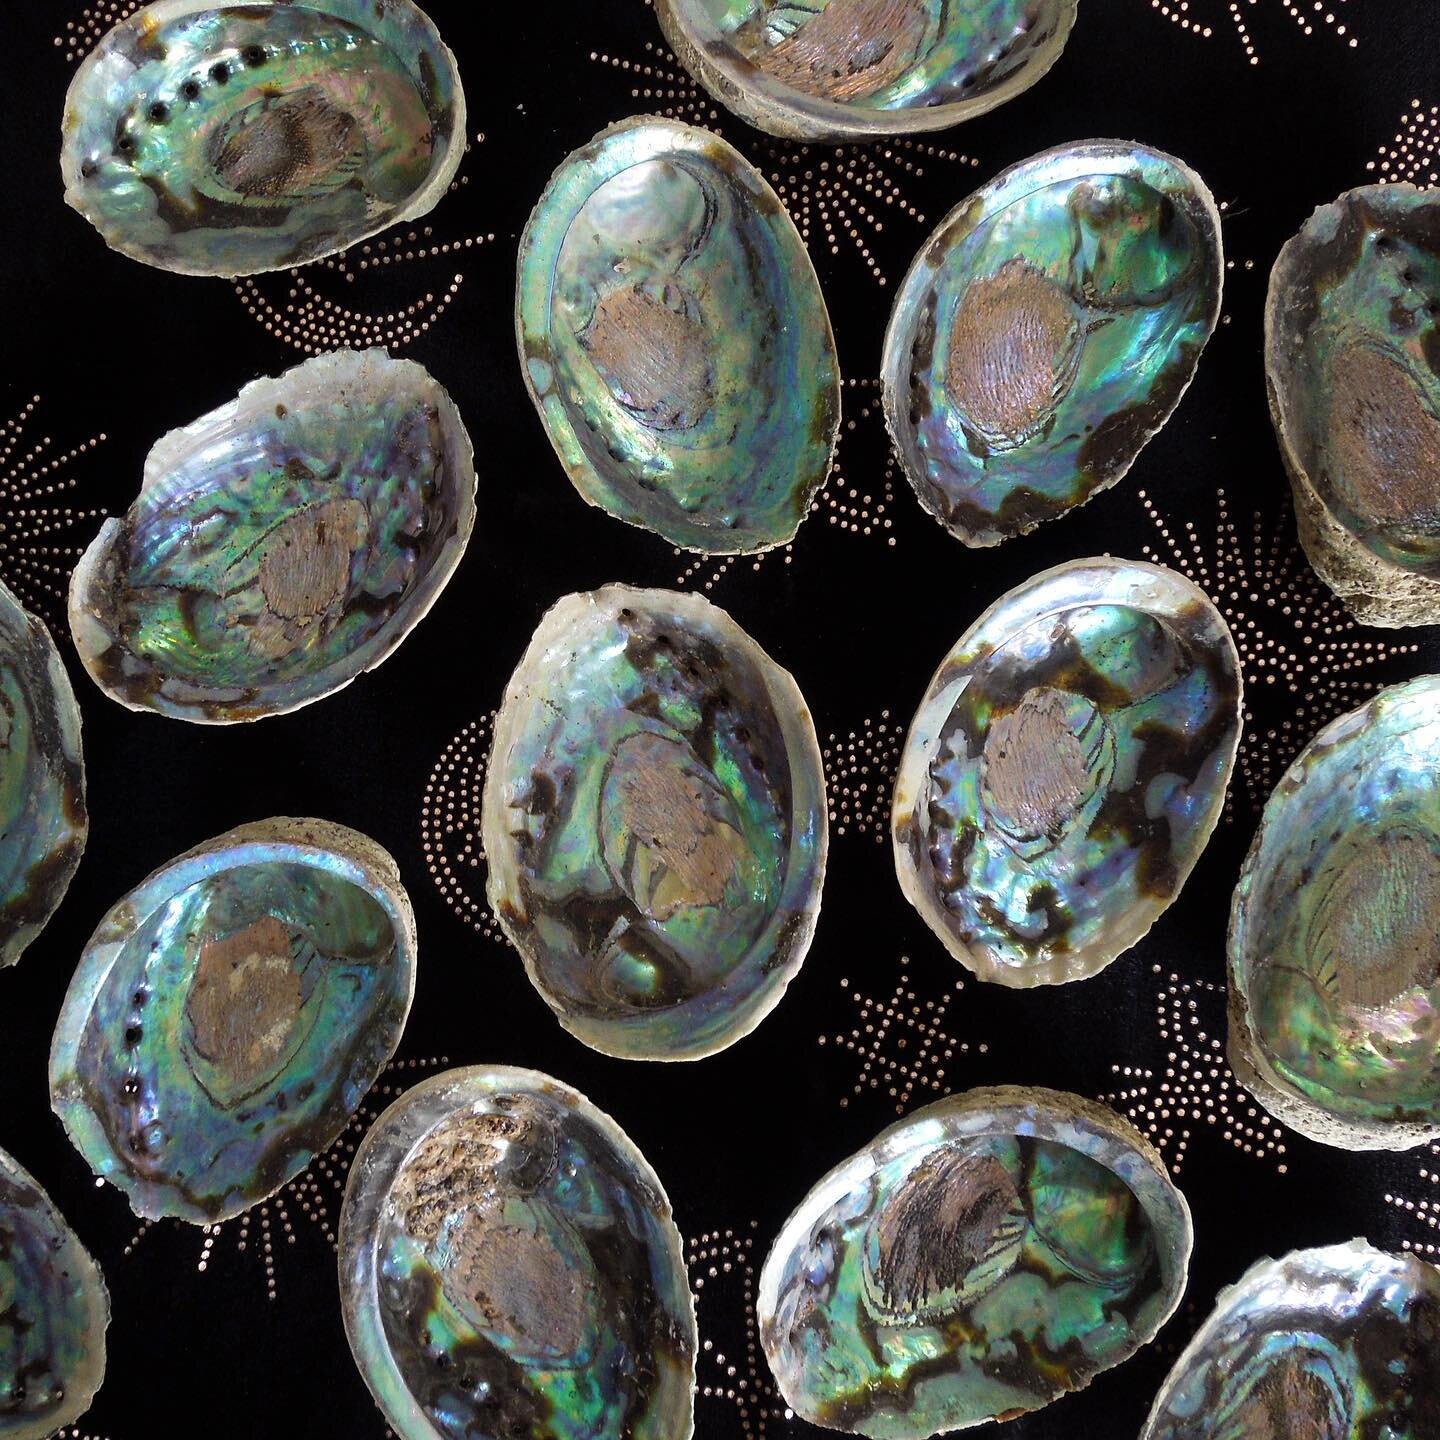 Wow wow wow!
New Abalone Shells available online &amp; in-store.

Naturally heatproof and perfect for burning sage &amp; incense.

#sage #abaloneshell #iridescent #smudging #cleansing #saging #incense #altarspace #apothecary #shipshewana